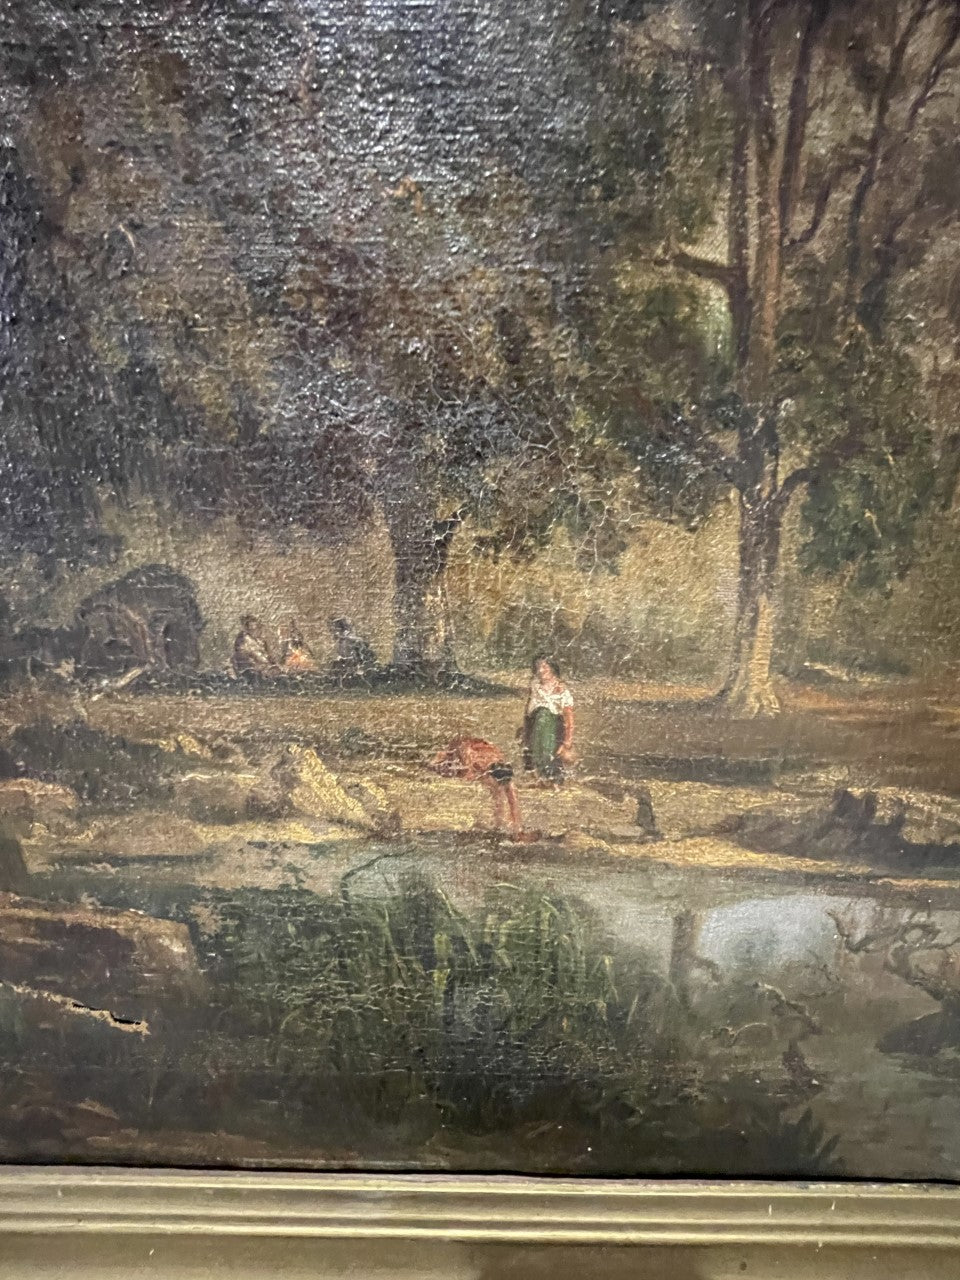 19th Century Oil On Canvas - Large French Landscape